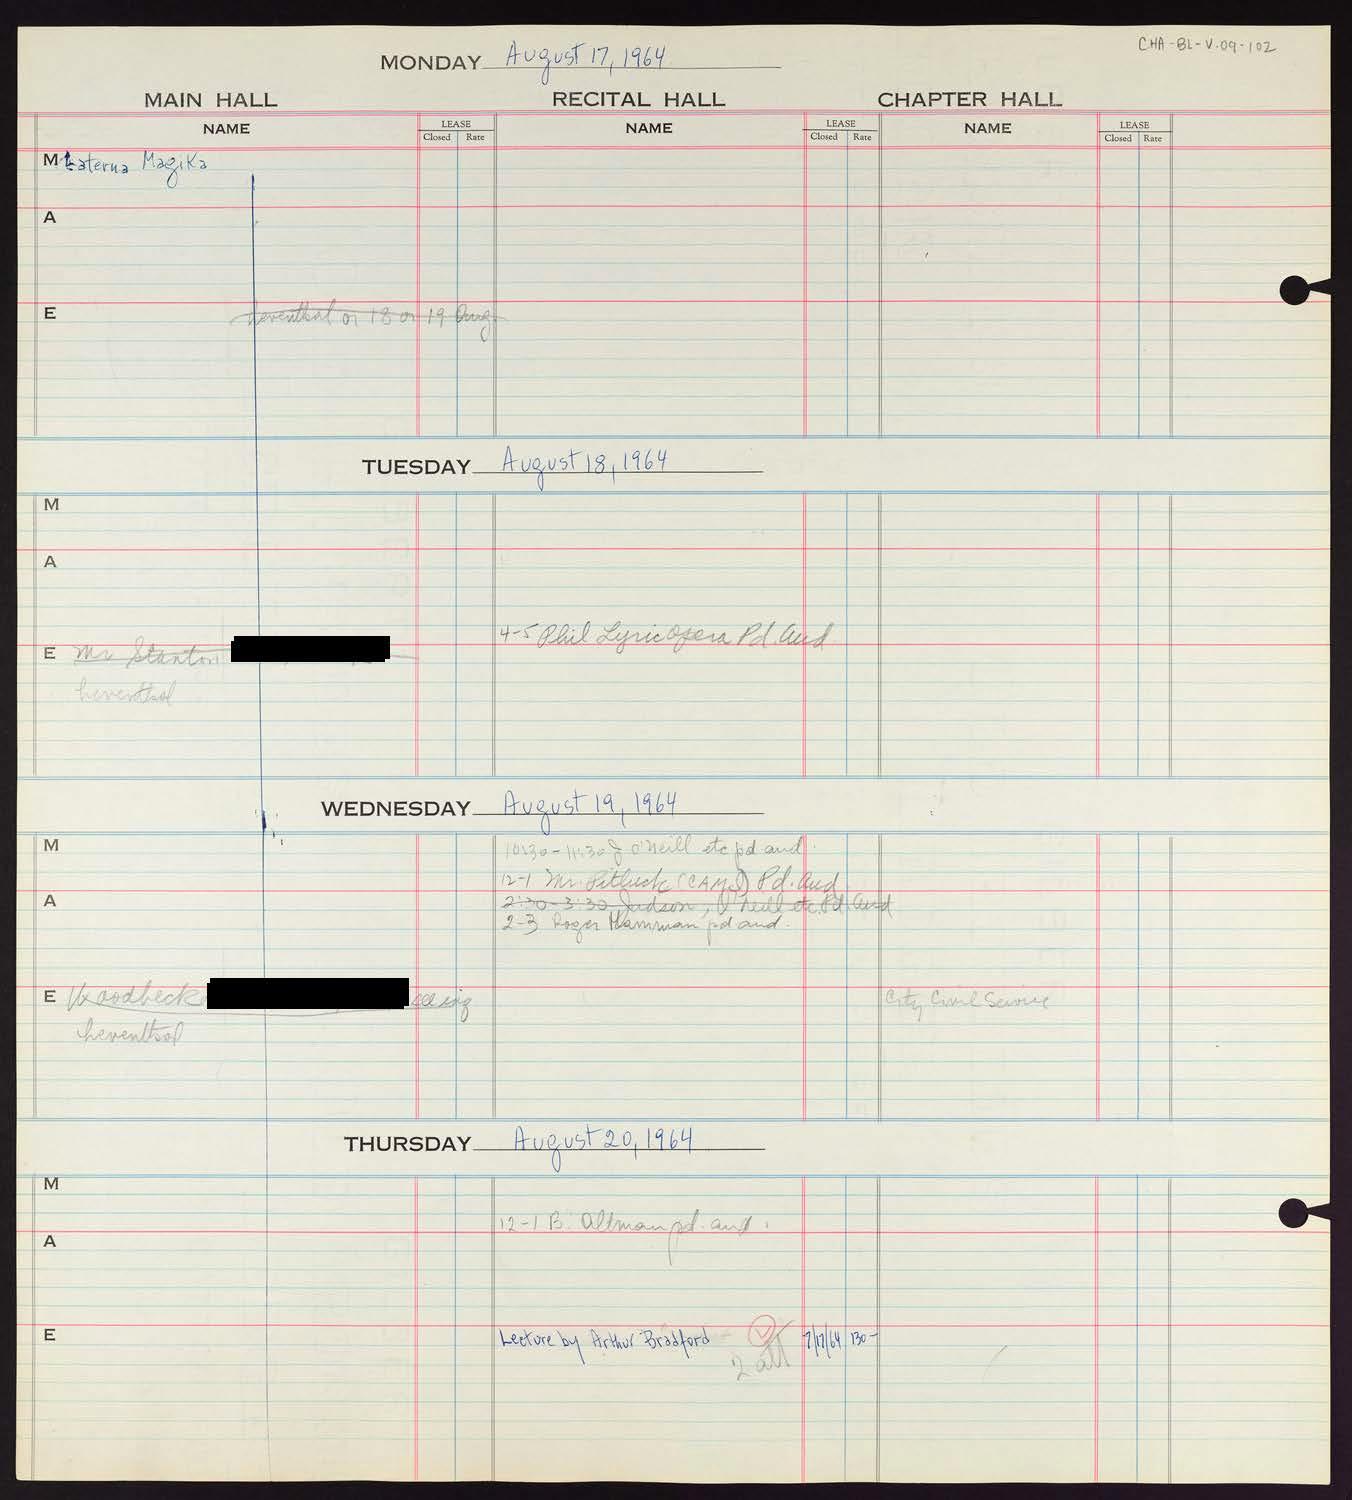 Carnegie Hall Booking Ledger, volume 9, page 102